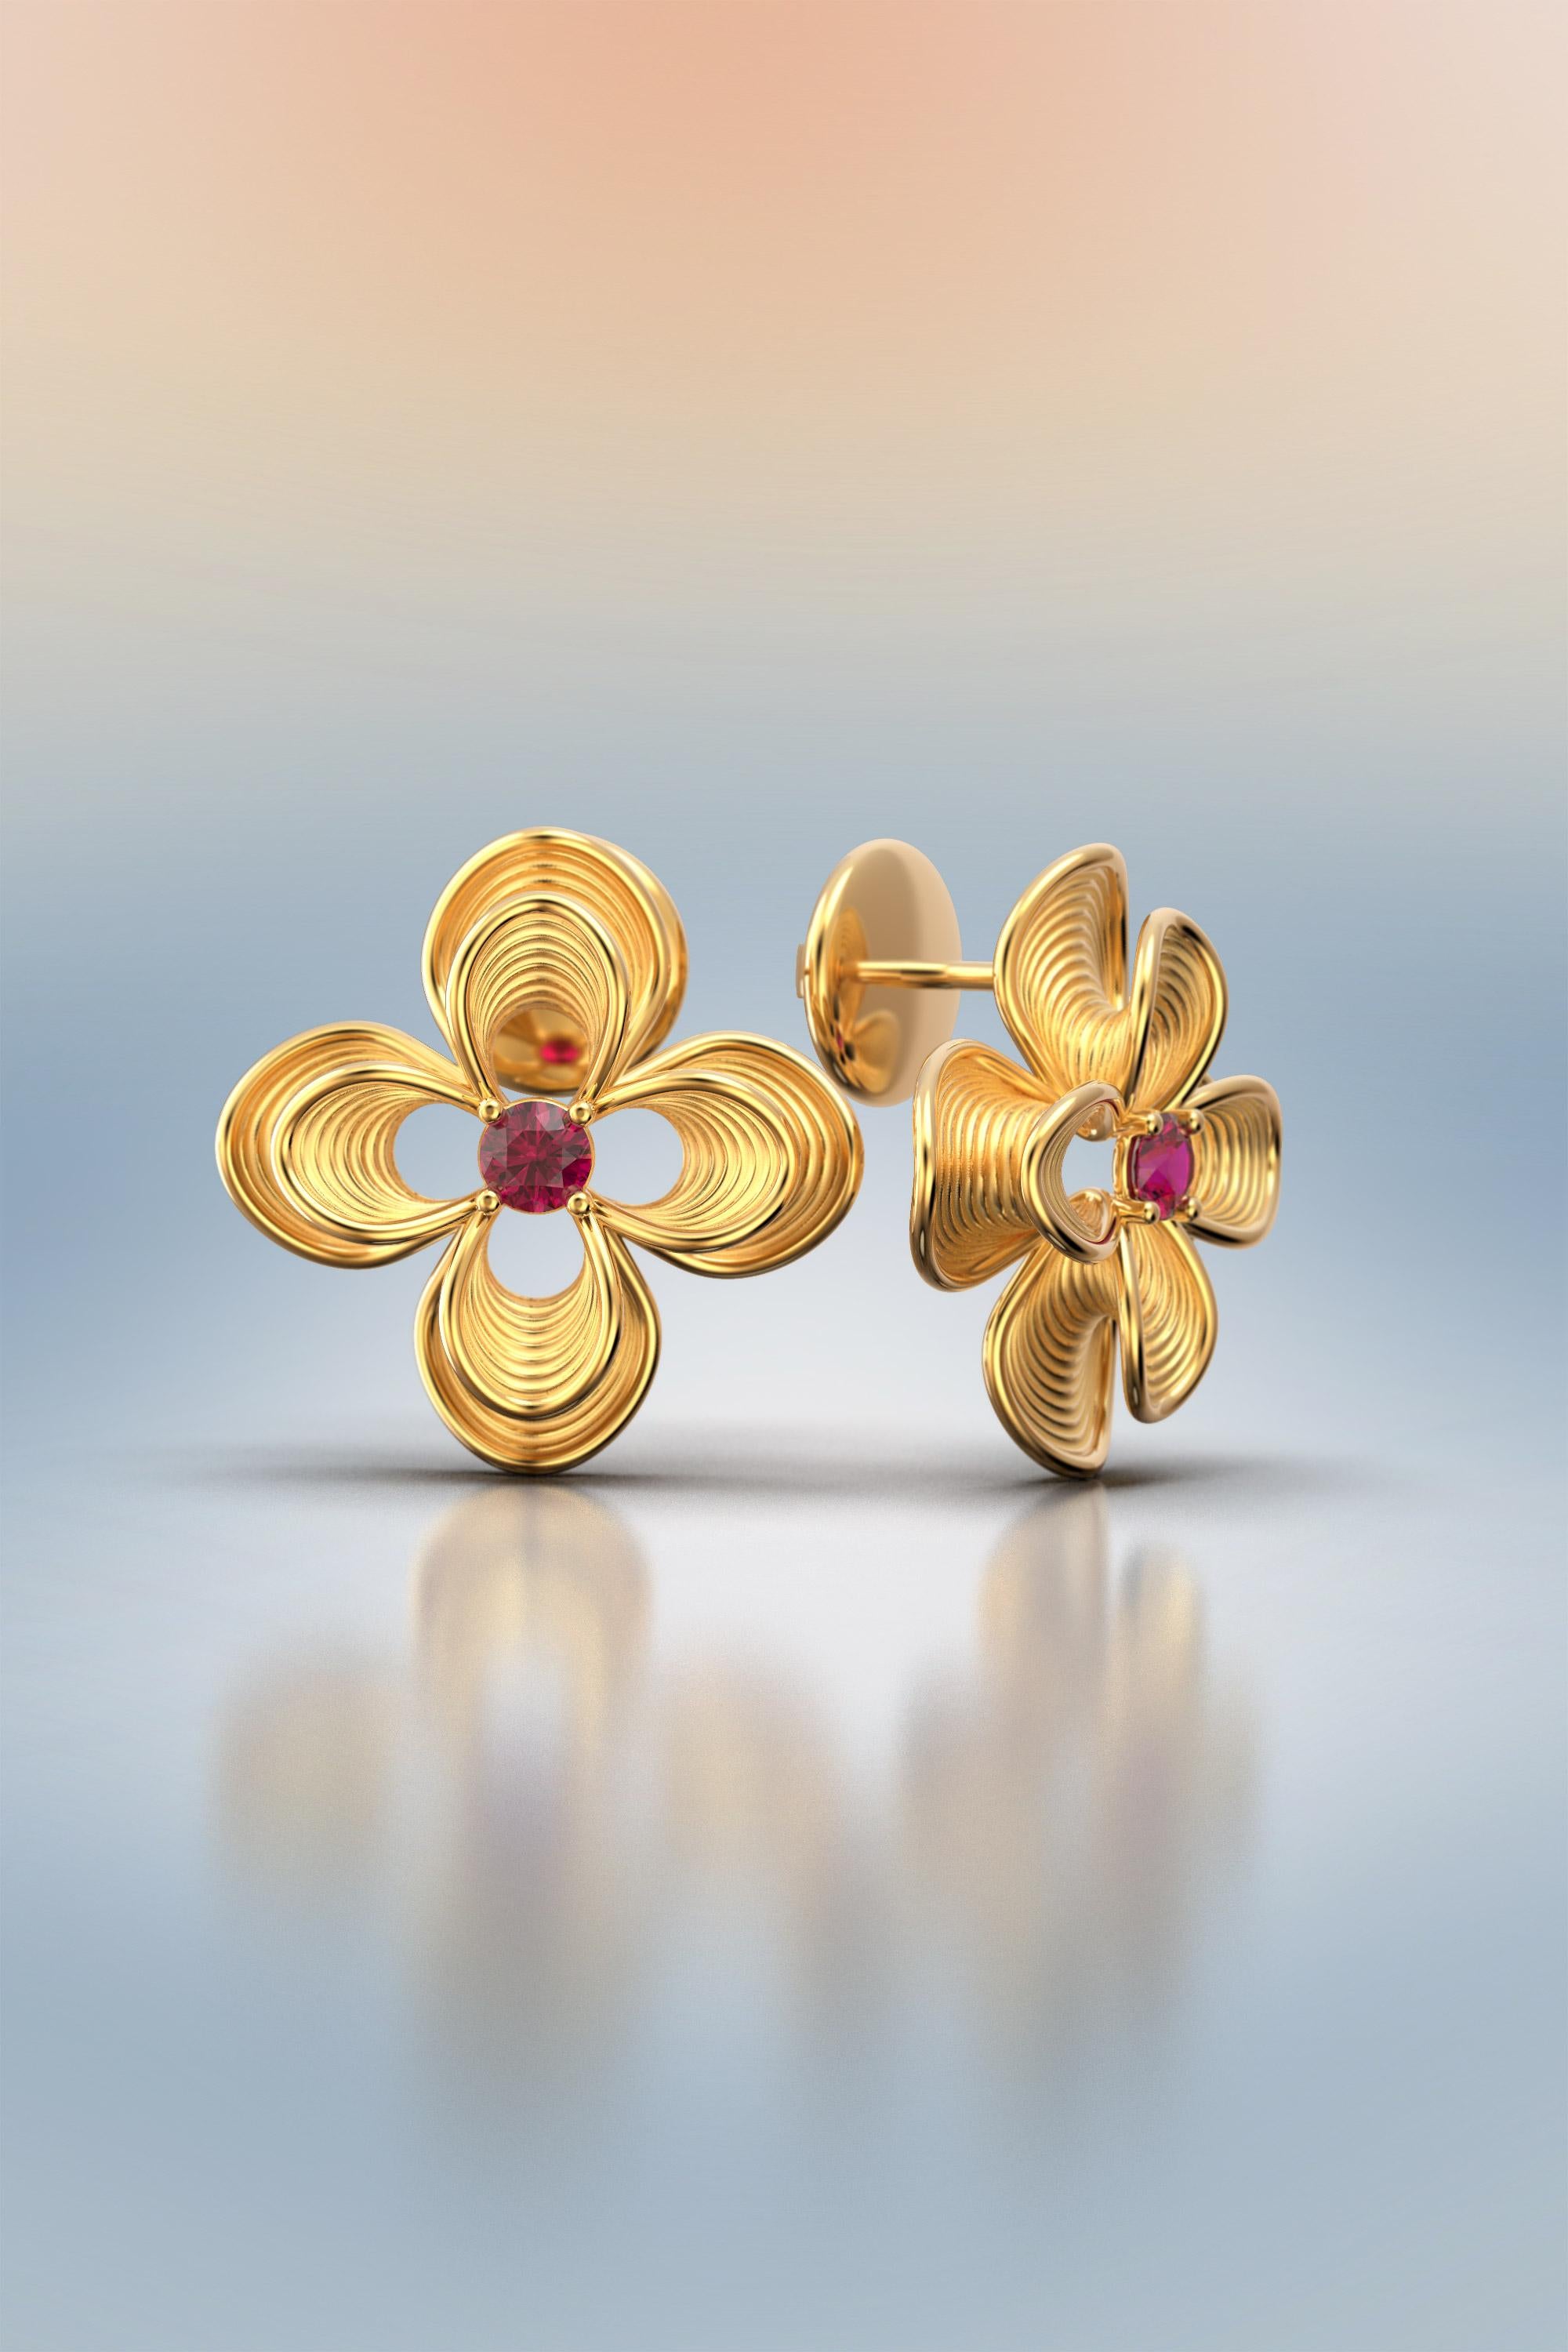 Contemporary Italian Ruby Stud Earrings in 14k Gold by Oltremare Gioielli For Sale